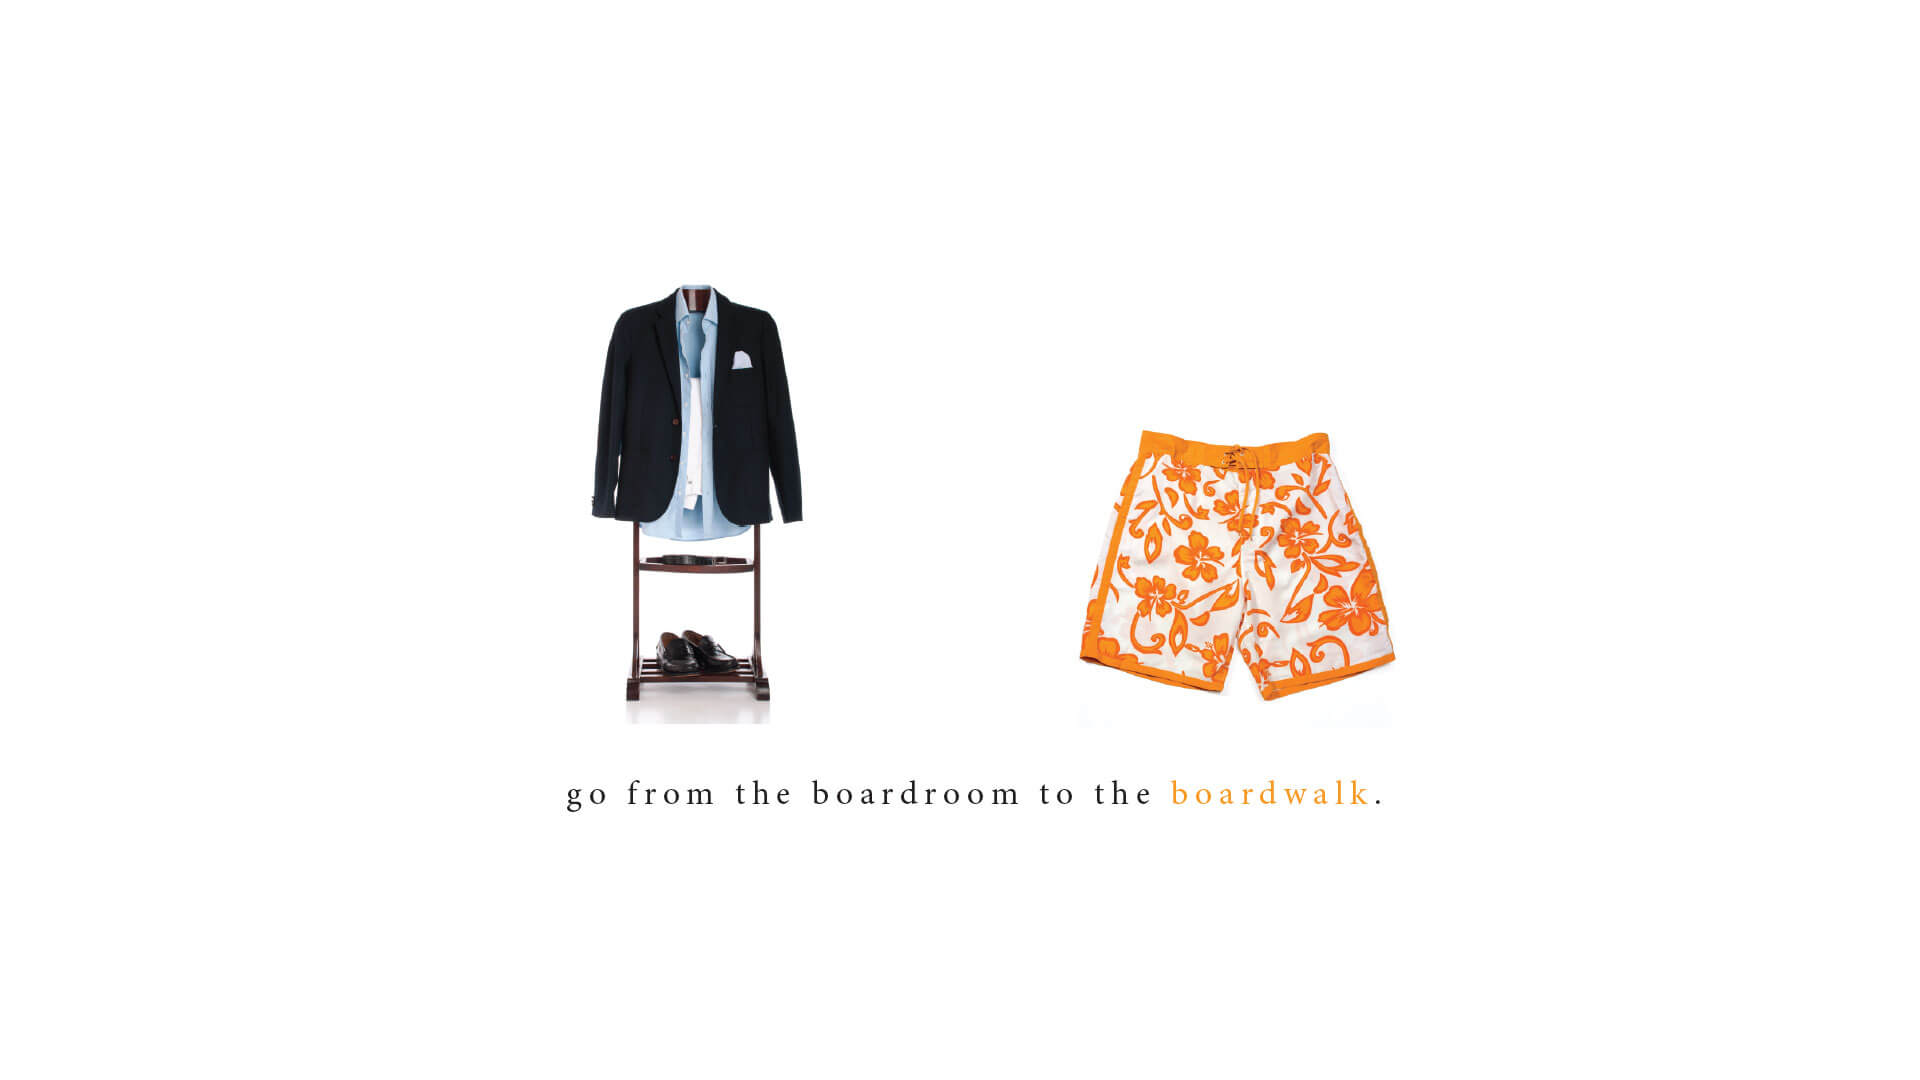 Go from the boardroom to the boardwalk hero image